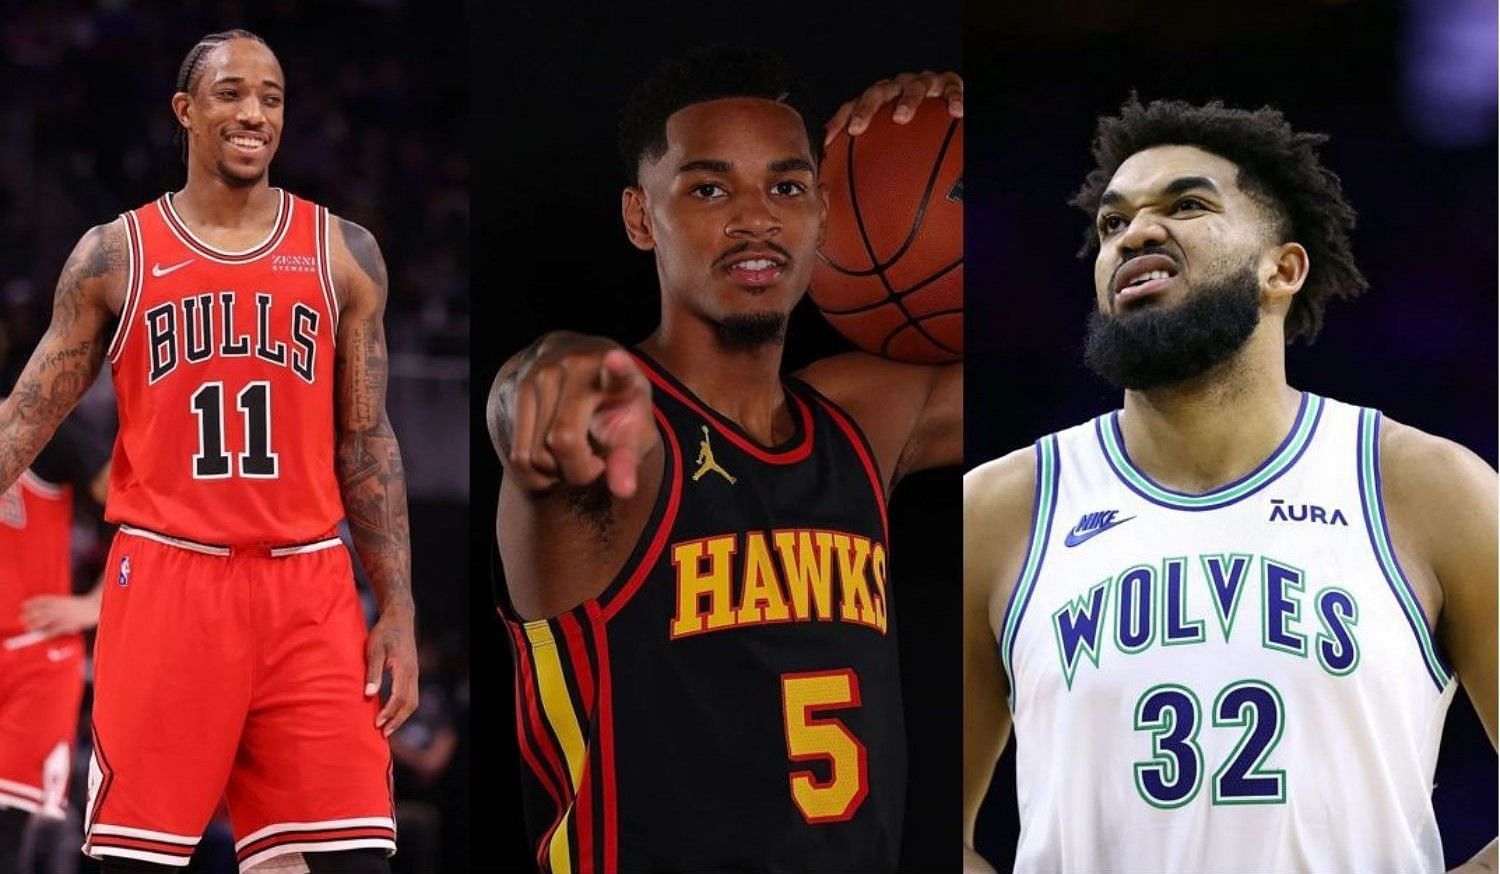 After the OG Anunoby trade, the New York Knicks may go next for (from left) DeMar DeRozan, Dejounte Murray and Karl-Anthony Towns.